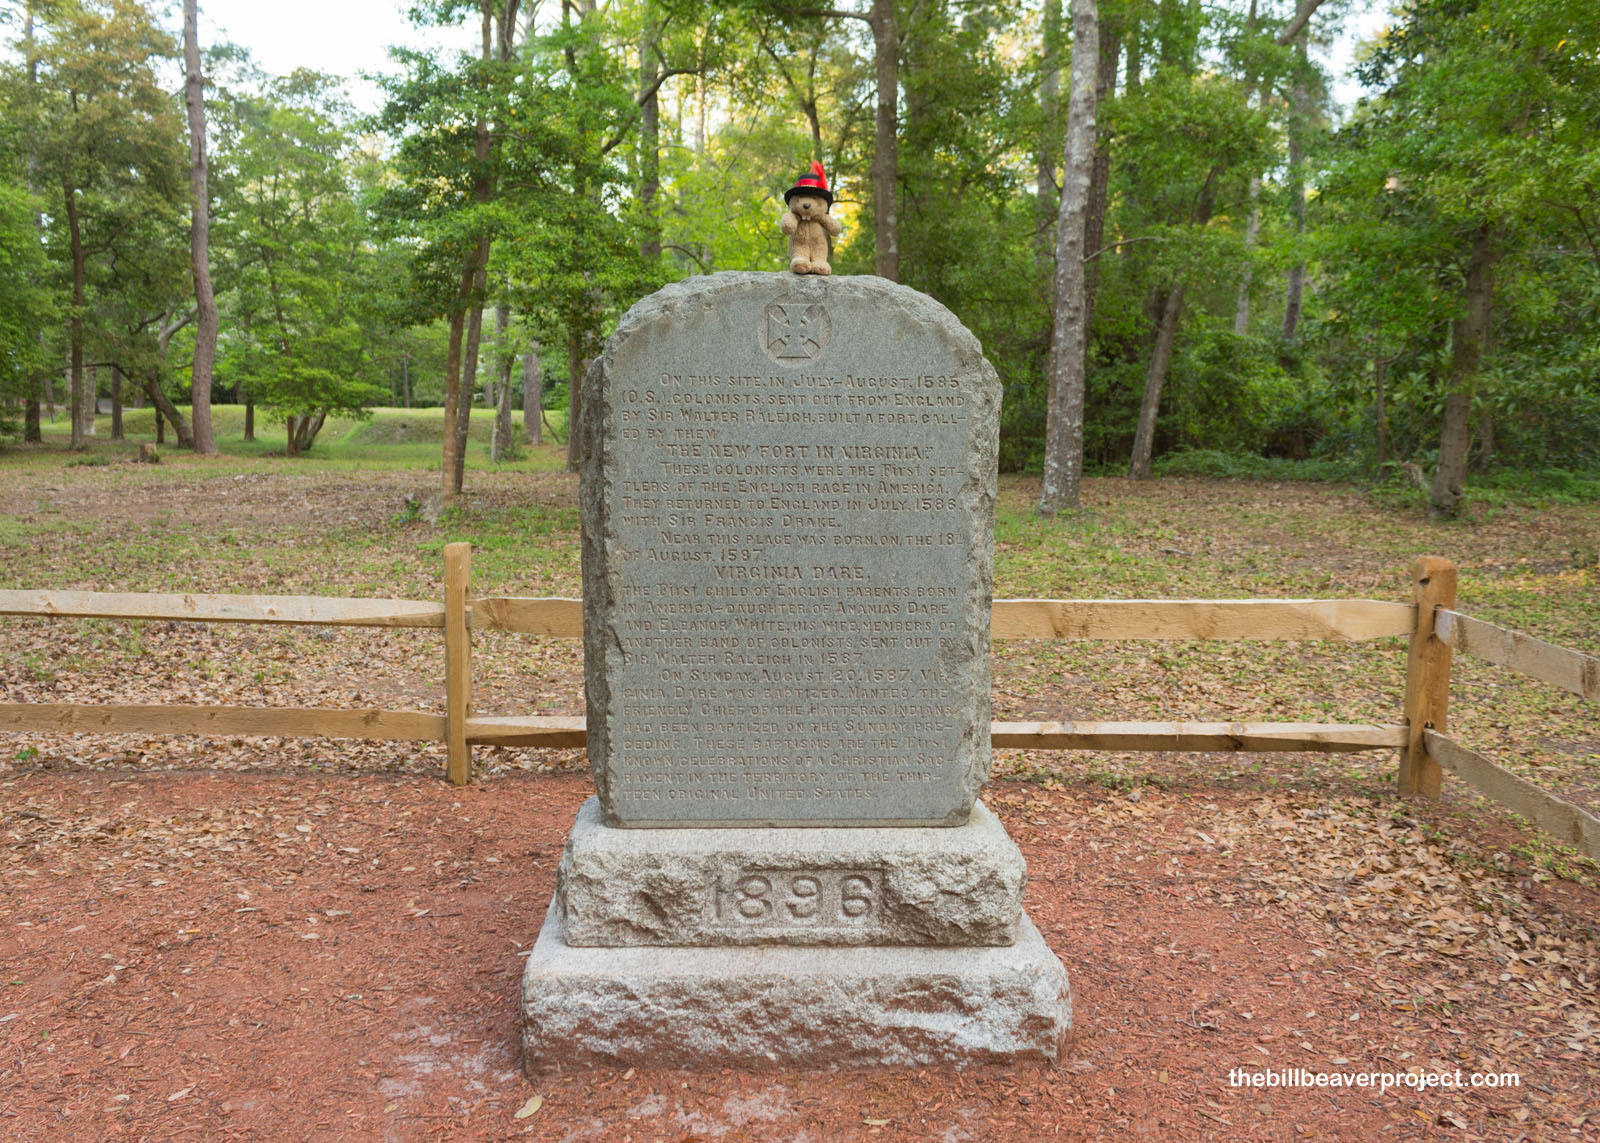 A monument marking the site of the fort!